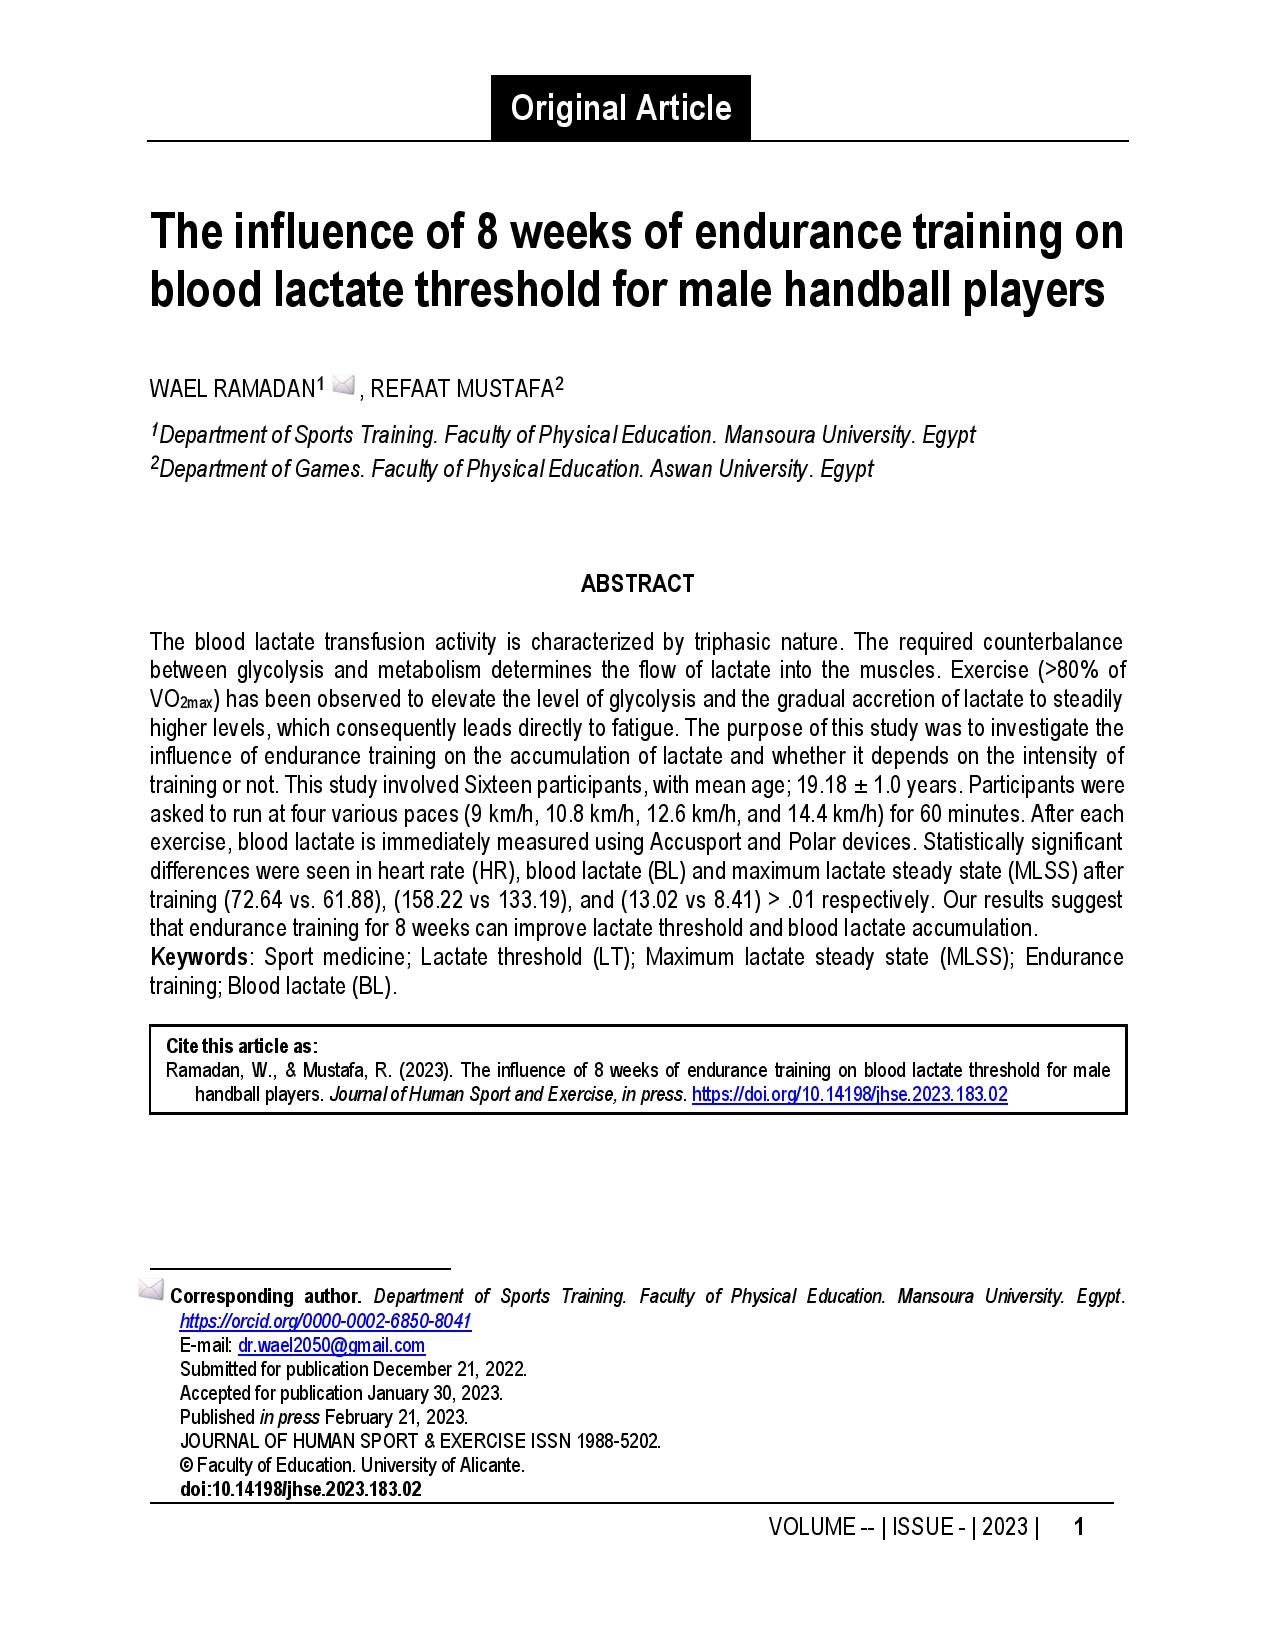 The influence of 8 weeks of endurance training on blood lactate threshold for male handball players